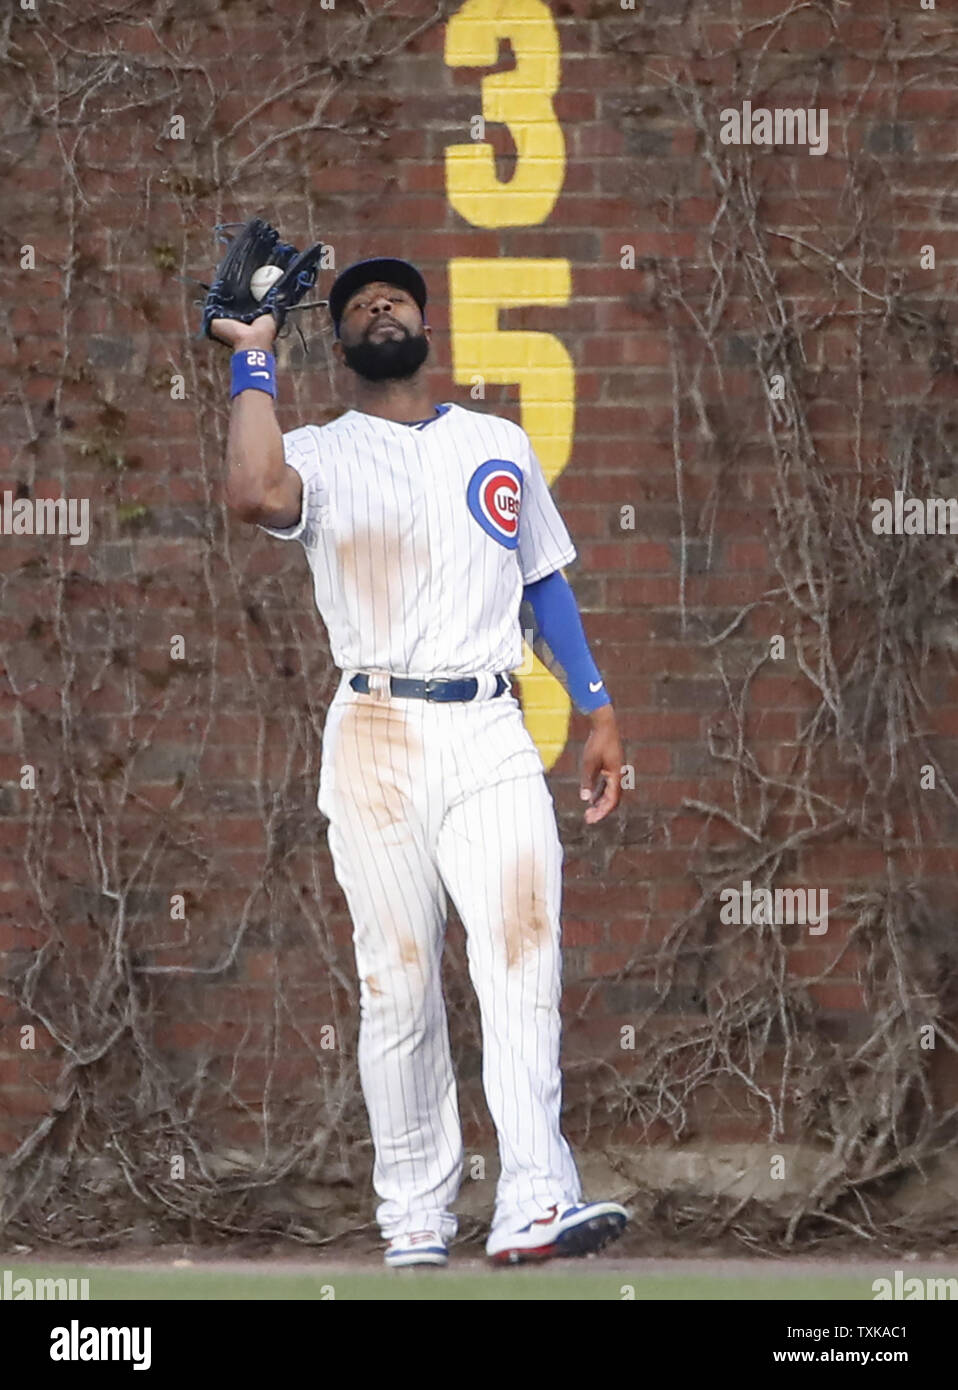 Chicago Cubs' Jason Heyward catches the fly ball hit by St. Louis Cardinals' Paul DeJong in the third inning at Wrigley Field on May 5, 2019 in Chicago. Photo by Kamil Krzaczynski/UPI Stock Photo